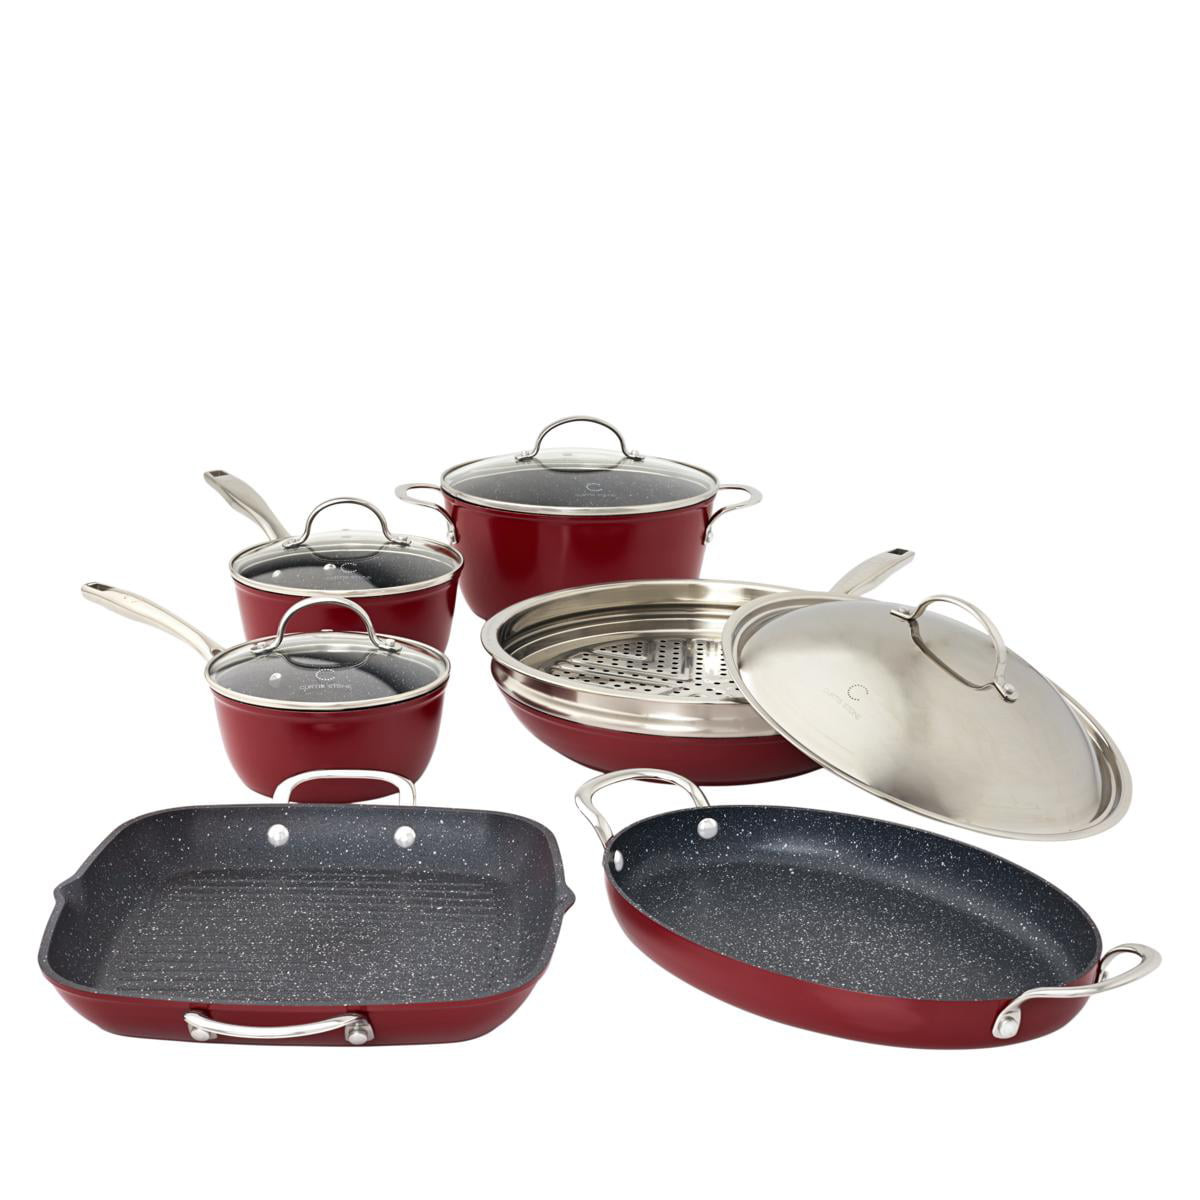 Curtis Stone Dura-Pan Nonstick 10-piece Chef's Cookware Set -Used 